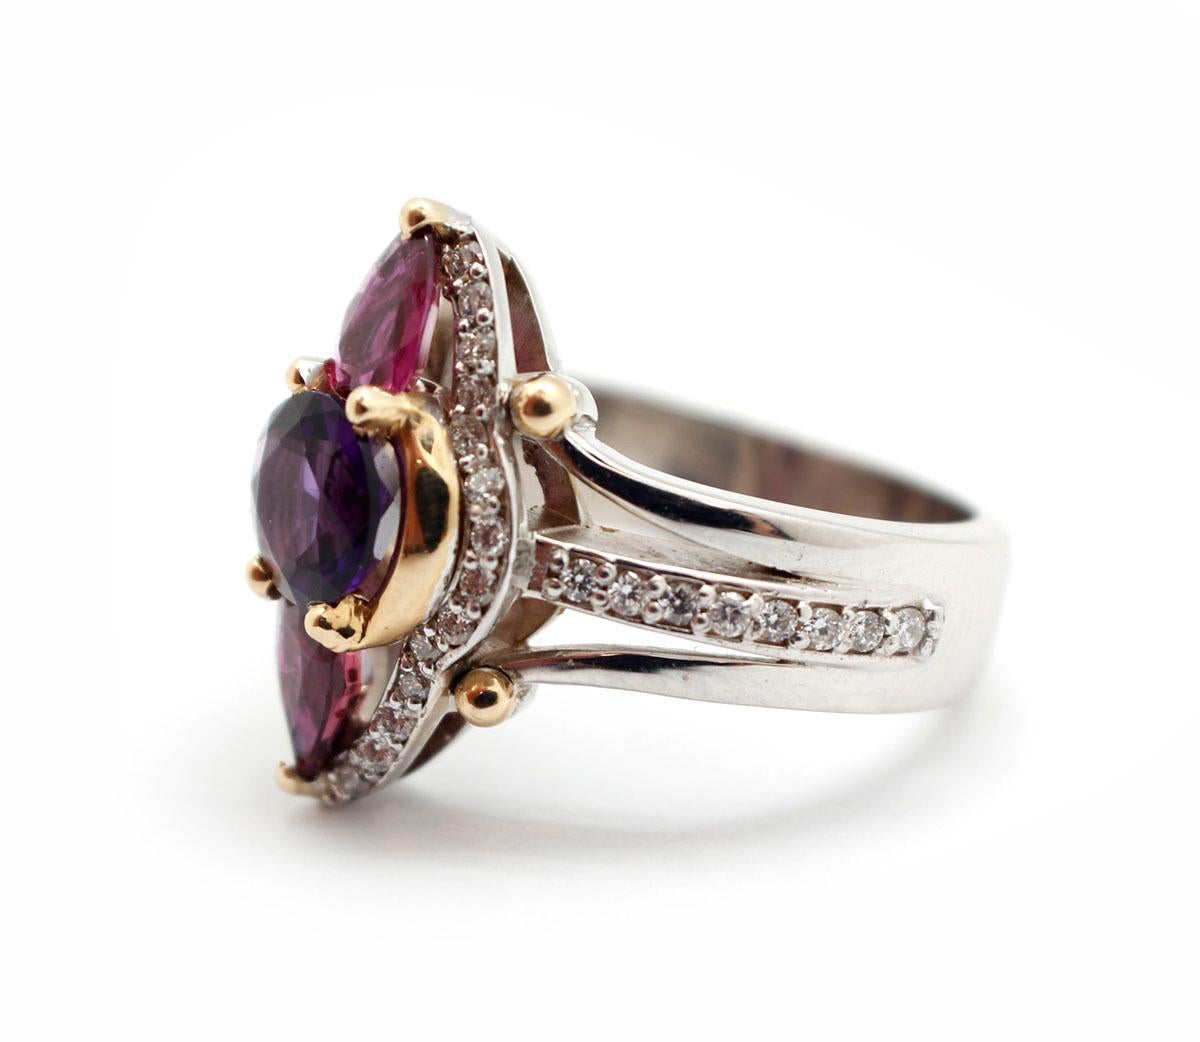 This beautiful cocktail ring is made in 14k white gold and set with dazzling gemstones. A single round-cut amethyst sits in the center with pear-cut garnets on either side of it. The rest of the ring is set in round diamonds for a total weight of